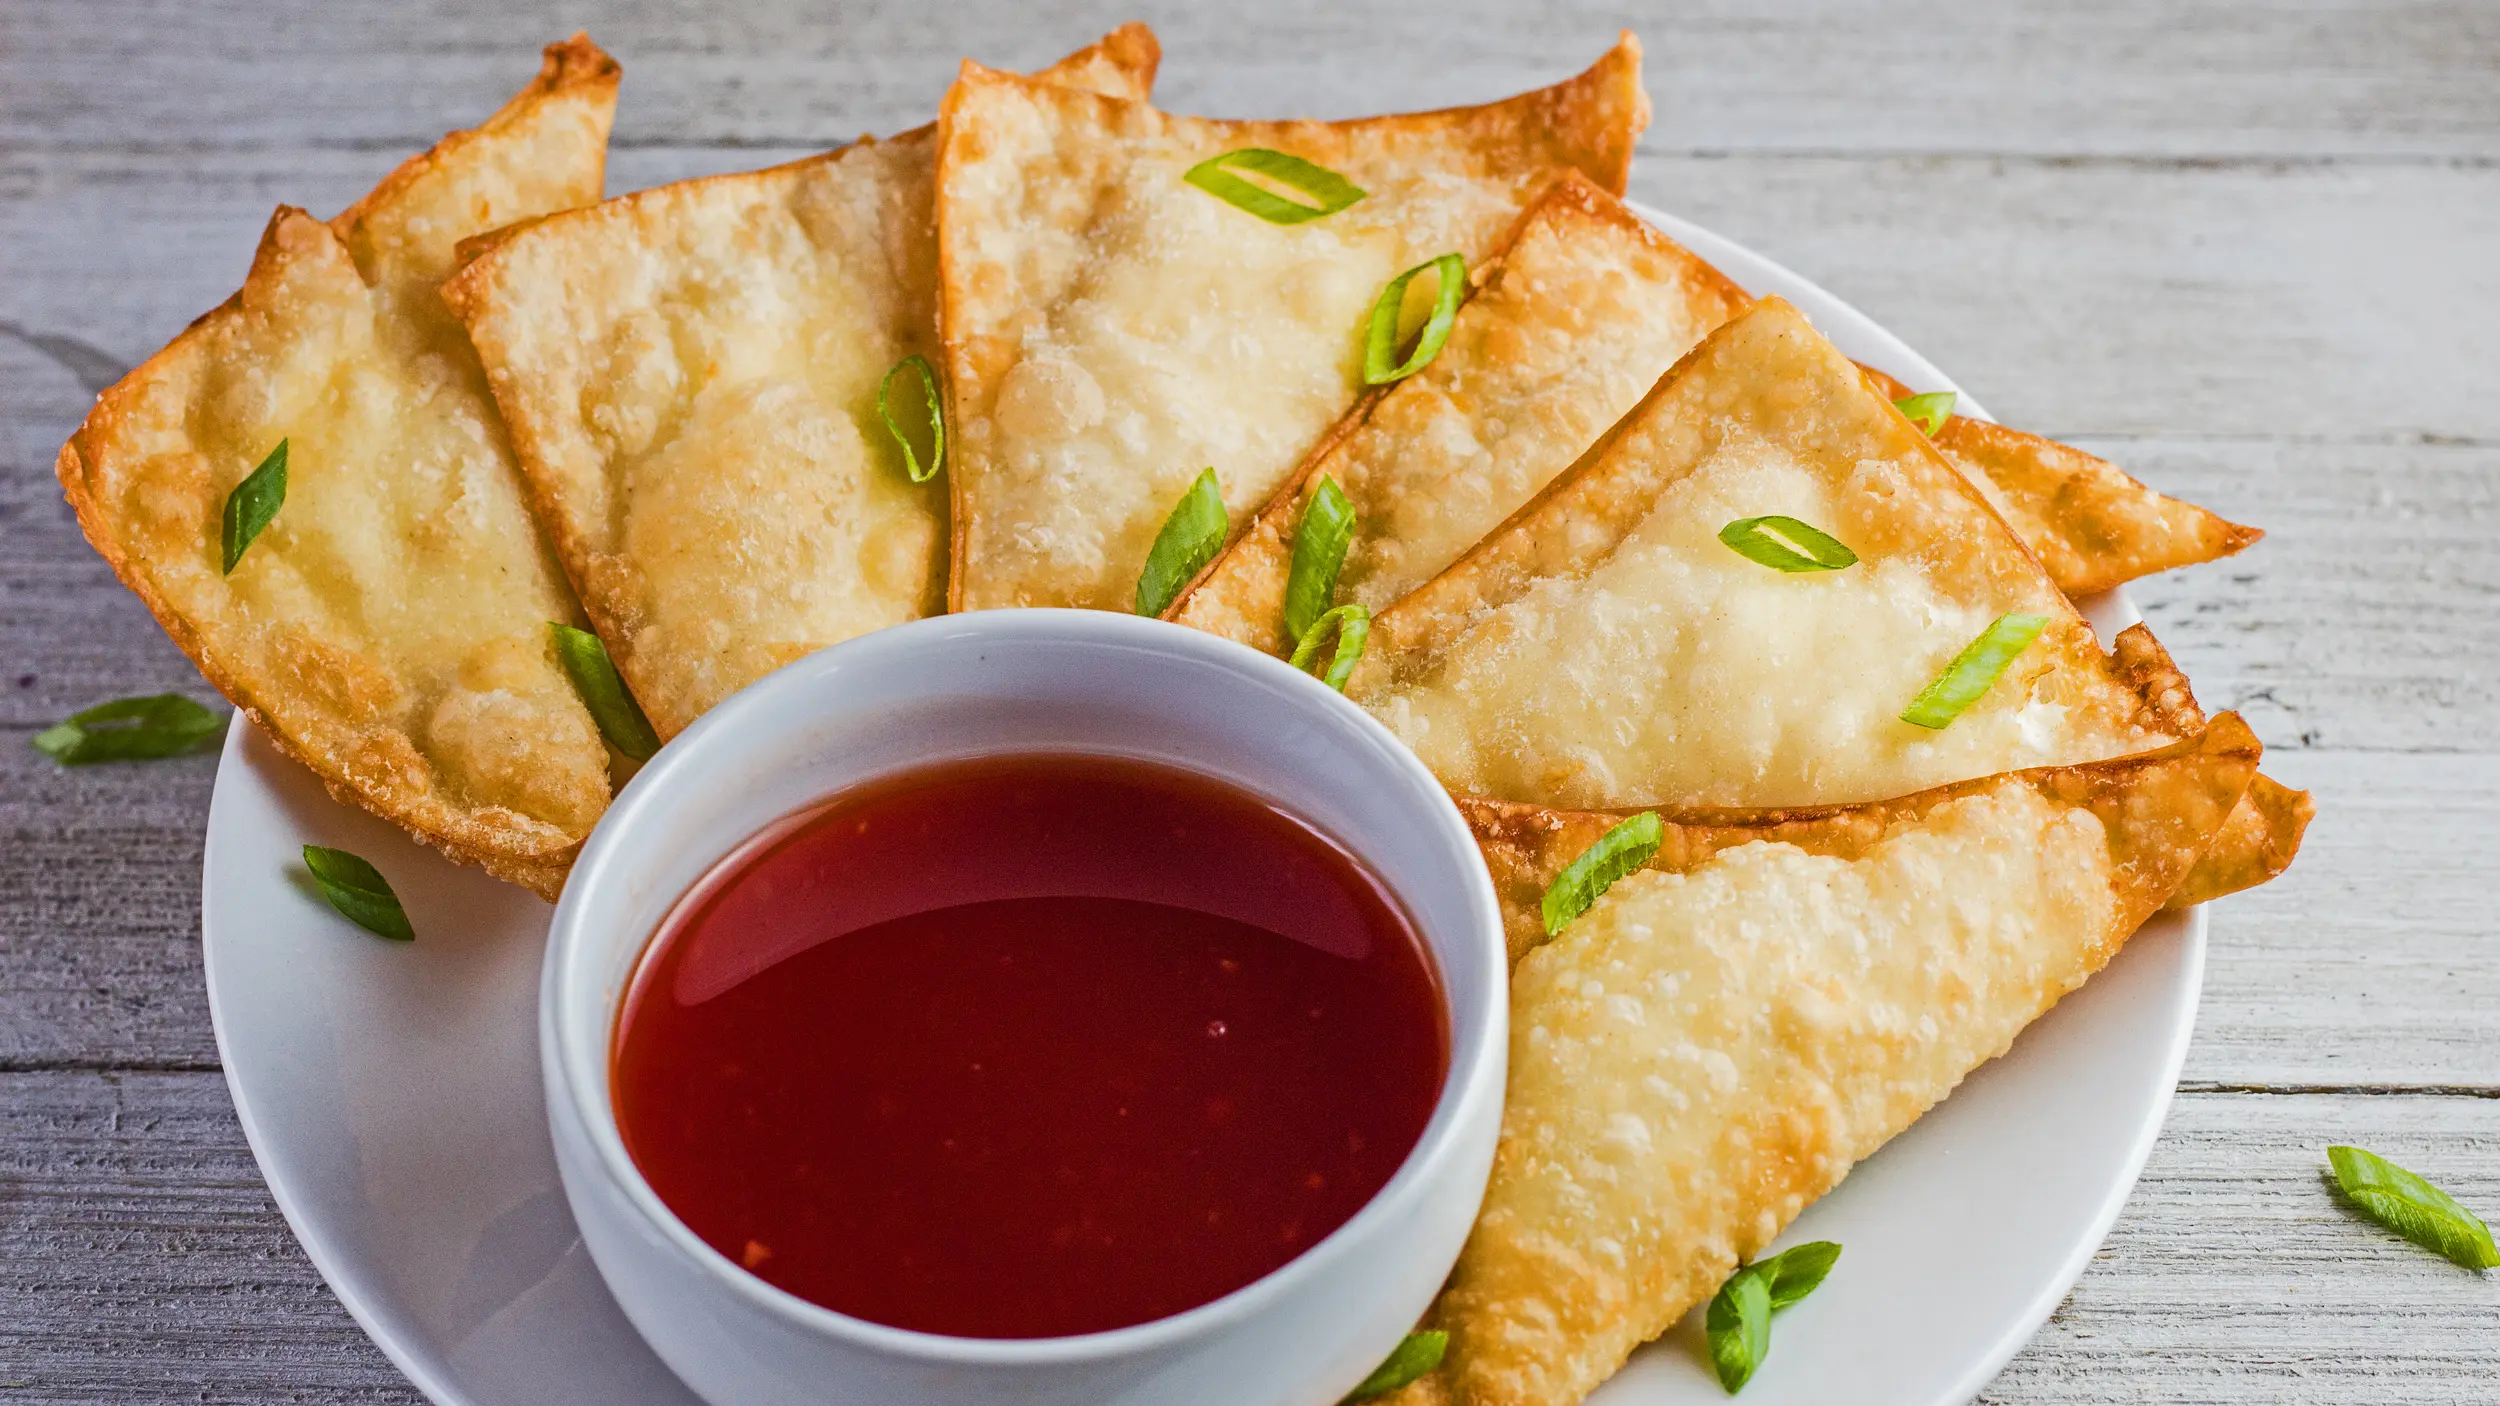 wide angled overhead image of the plated cream cheese wontons with sweet and sour sauce for dipping.